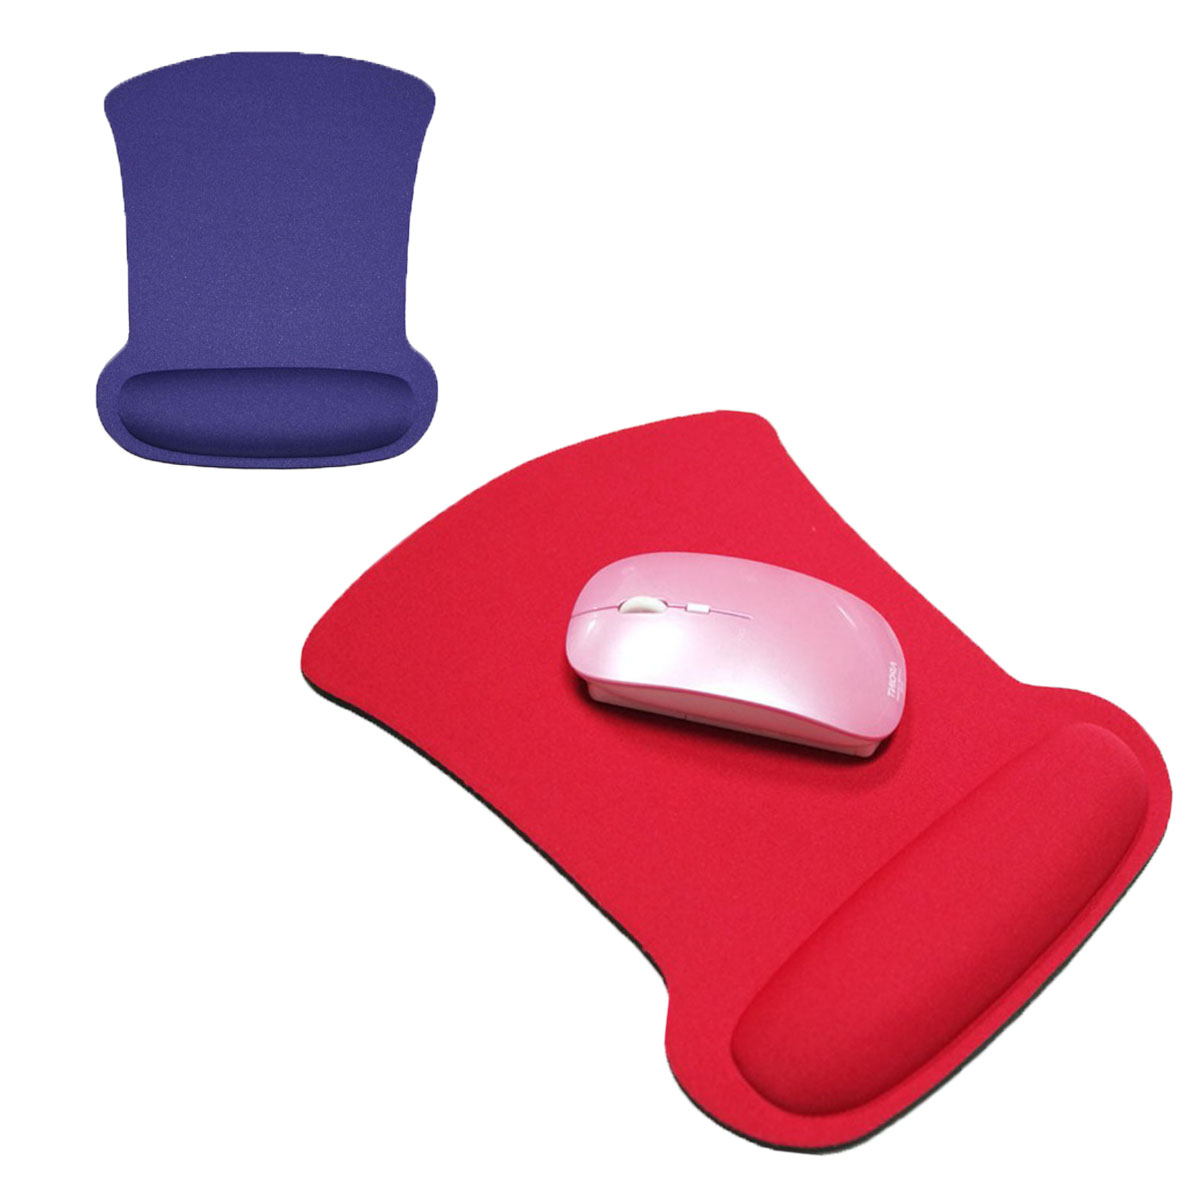 GL-AKL0101 Square Mouse Pad with Wrist Protect